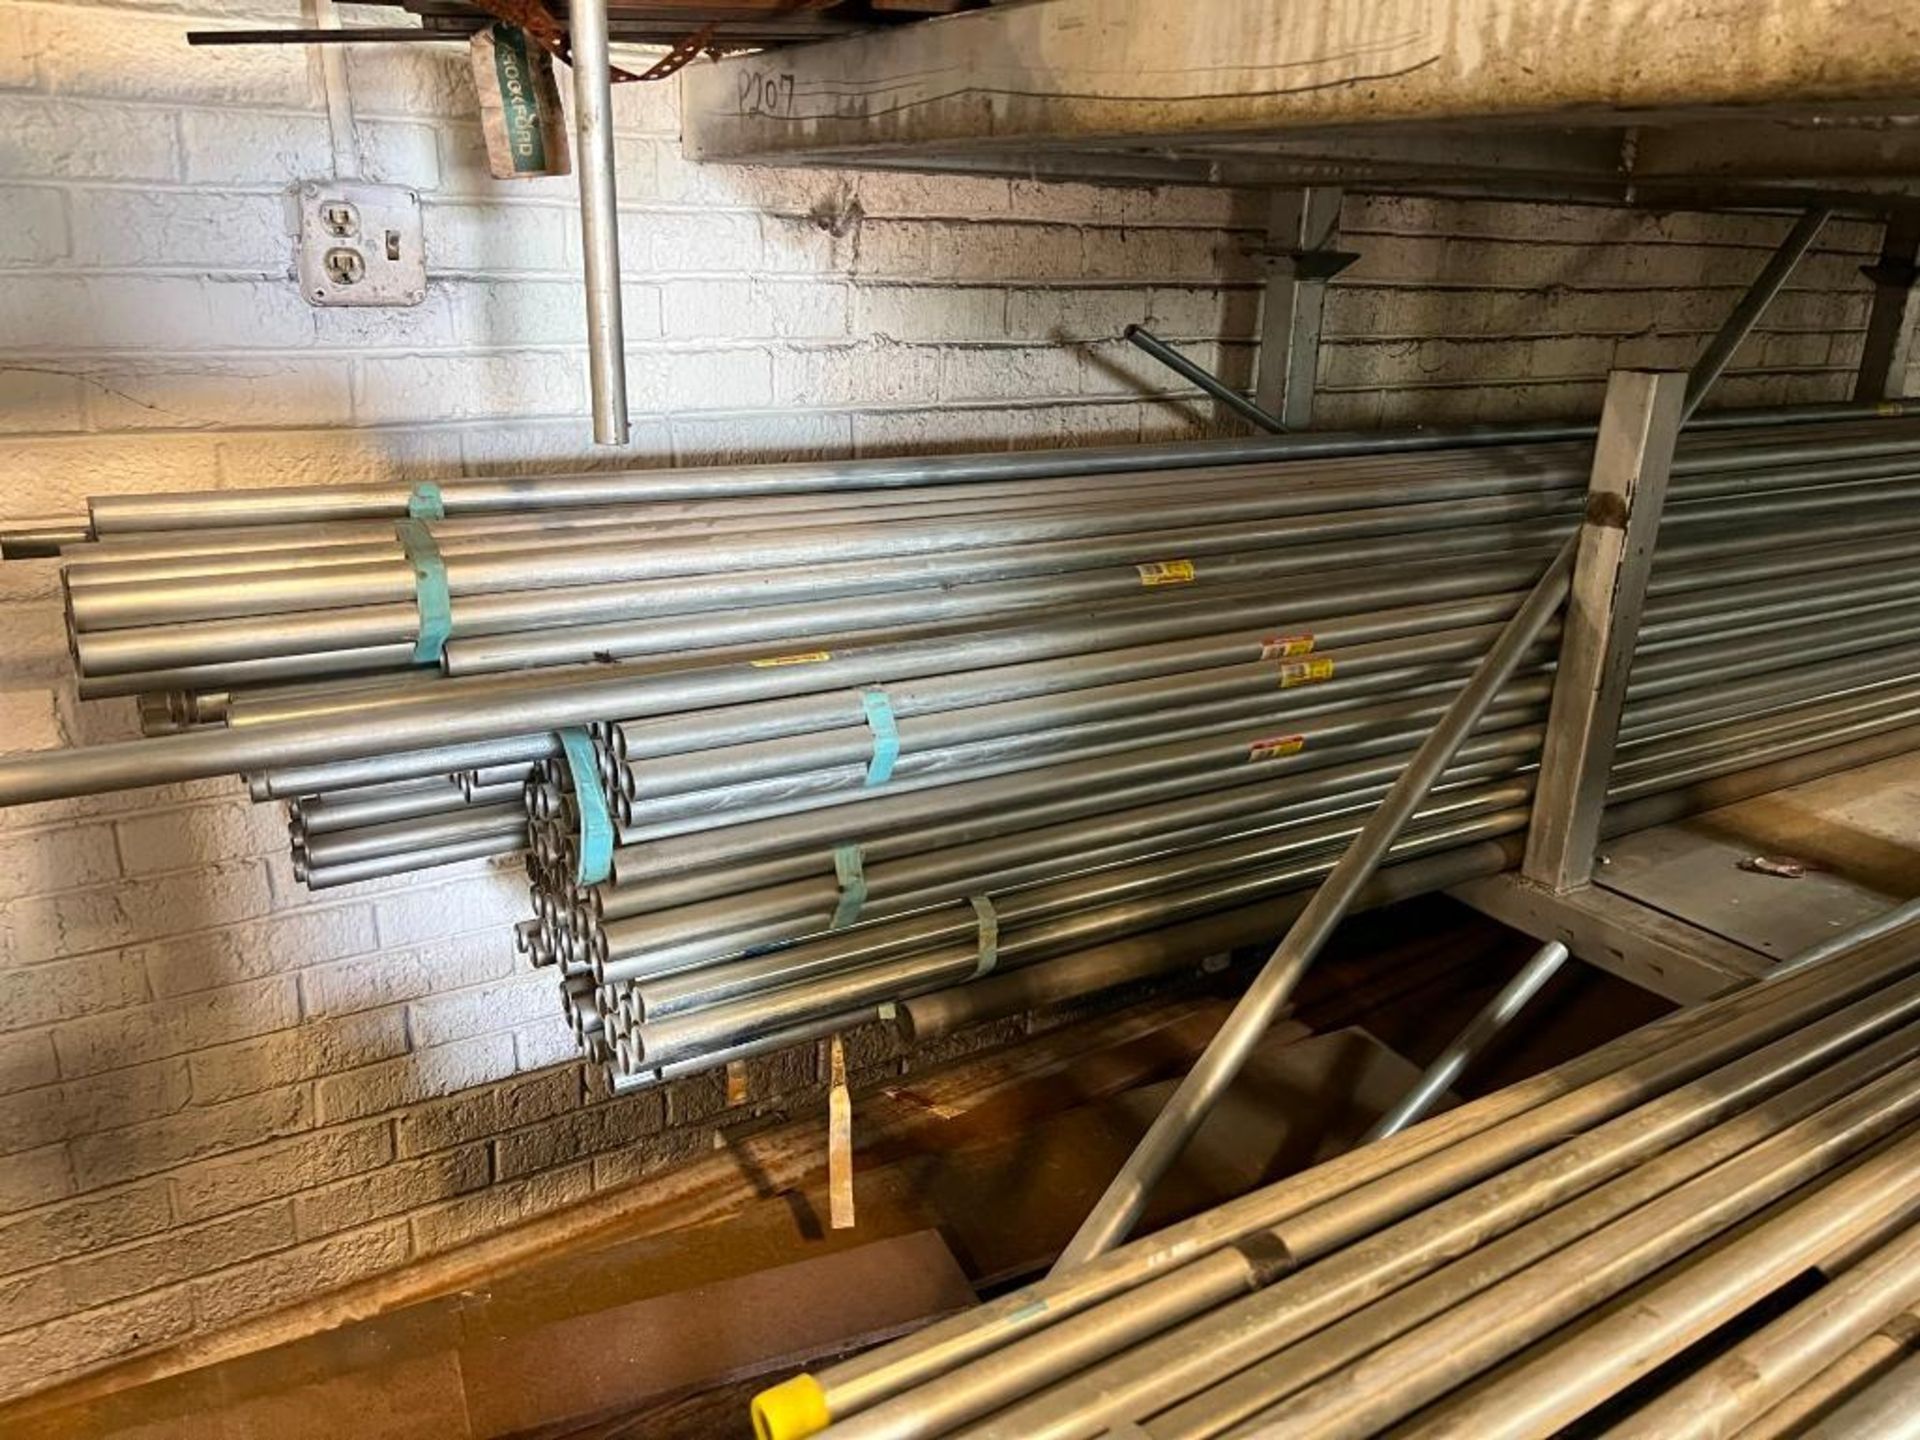 Lot: Stackable Racks with Quantity of .5" & 1" Wheatland Conduit with Assorted Steel Stock & Rollers - Image 3 of 6